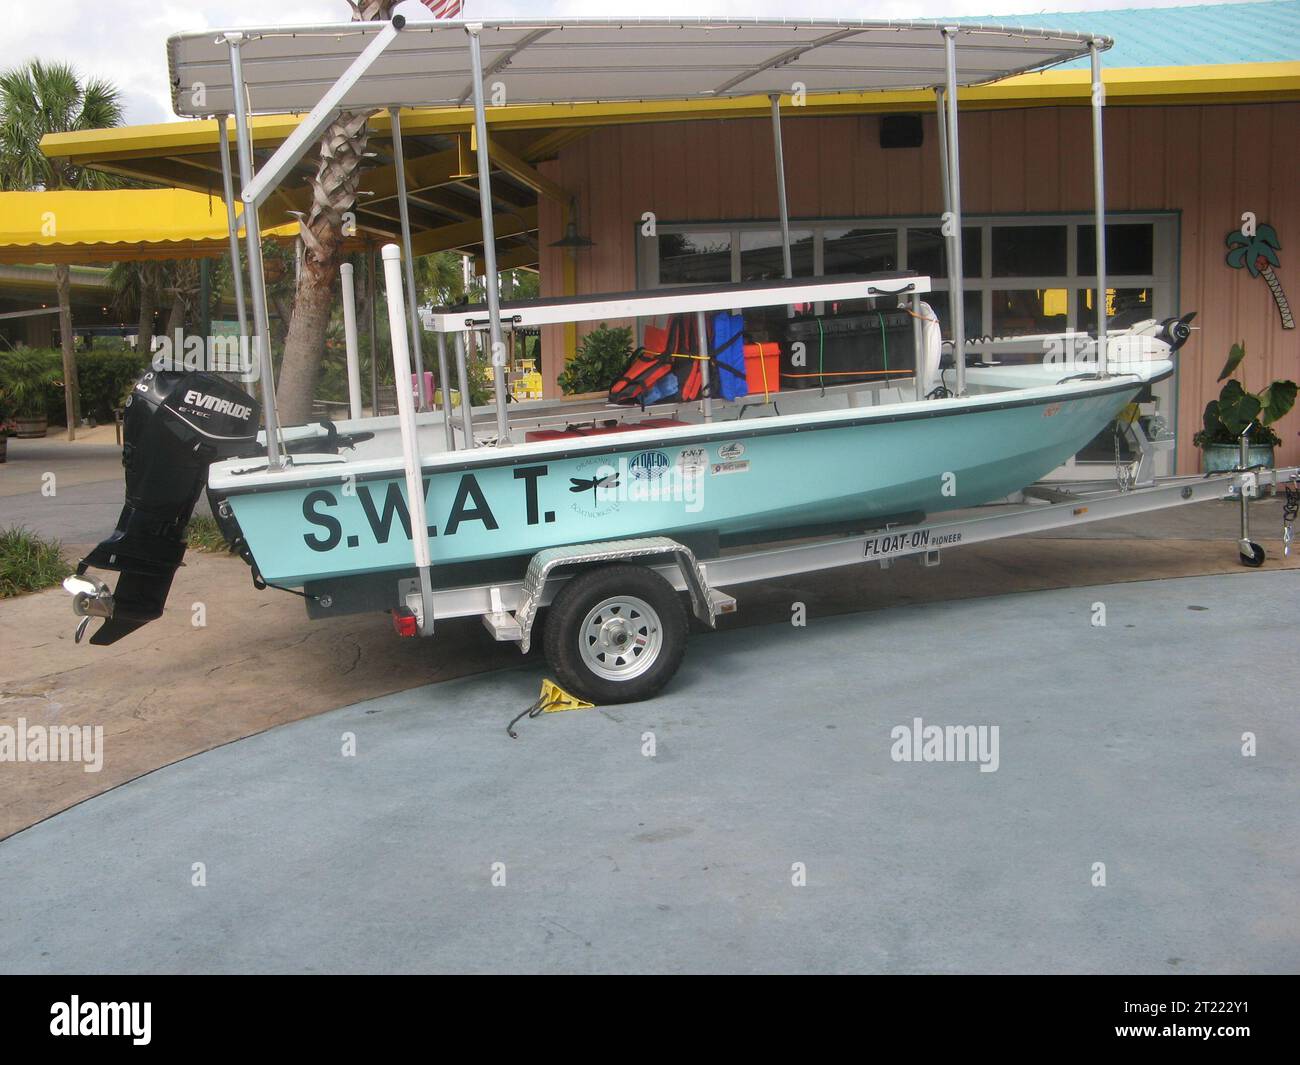 Gulf Shores, Ala - July 19, 2010: The Shallow Water Attention Terminal (SWAT) boat donated to the Friends of Bon Secour National Wildlife Refuge by Jimmy Buffett. Lulu's, a restaurant owned by Buffett's sister, hosted the event. The boat's color, depth, m. Subjects: Boats; Deepwater Horizon Oil Spill. Location: Alabama. Fish and Wildlife Service Site: BON SECOUR NATIONAL WILDLIFE REFUGE. Stock Photo